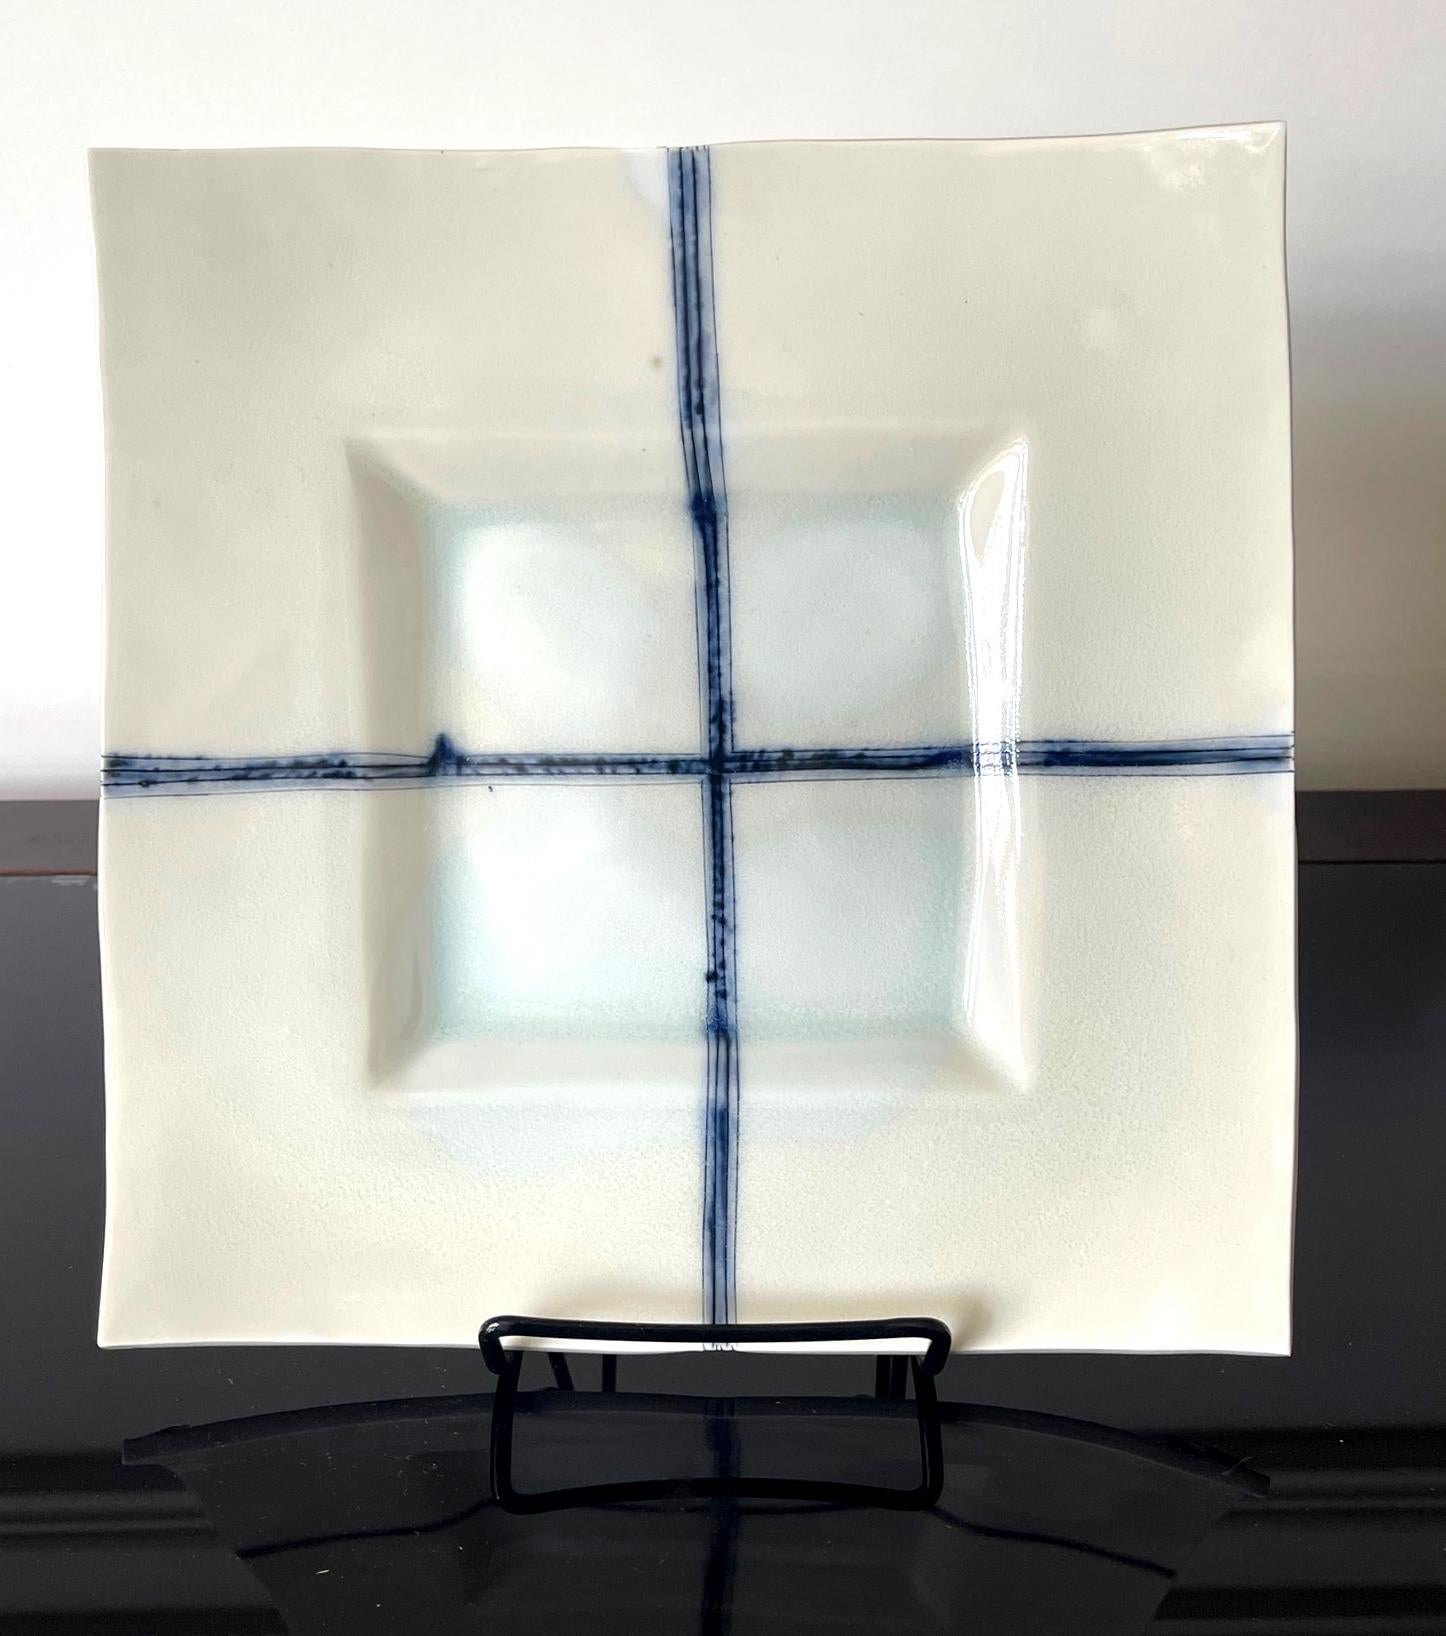 A ceramic square plate with white-celadon glaze by Japanese potter Yoshikawa Masamichi (1946-). The sharp-edged plate features a concaved center and wide border. Cobalt blue lines in bands were drawn to cross at the center. The base also has a